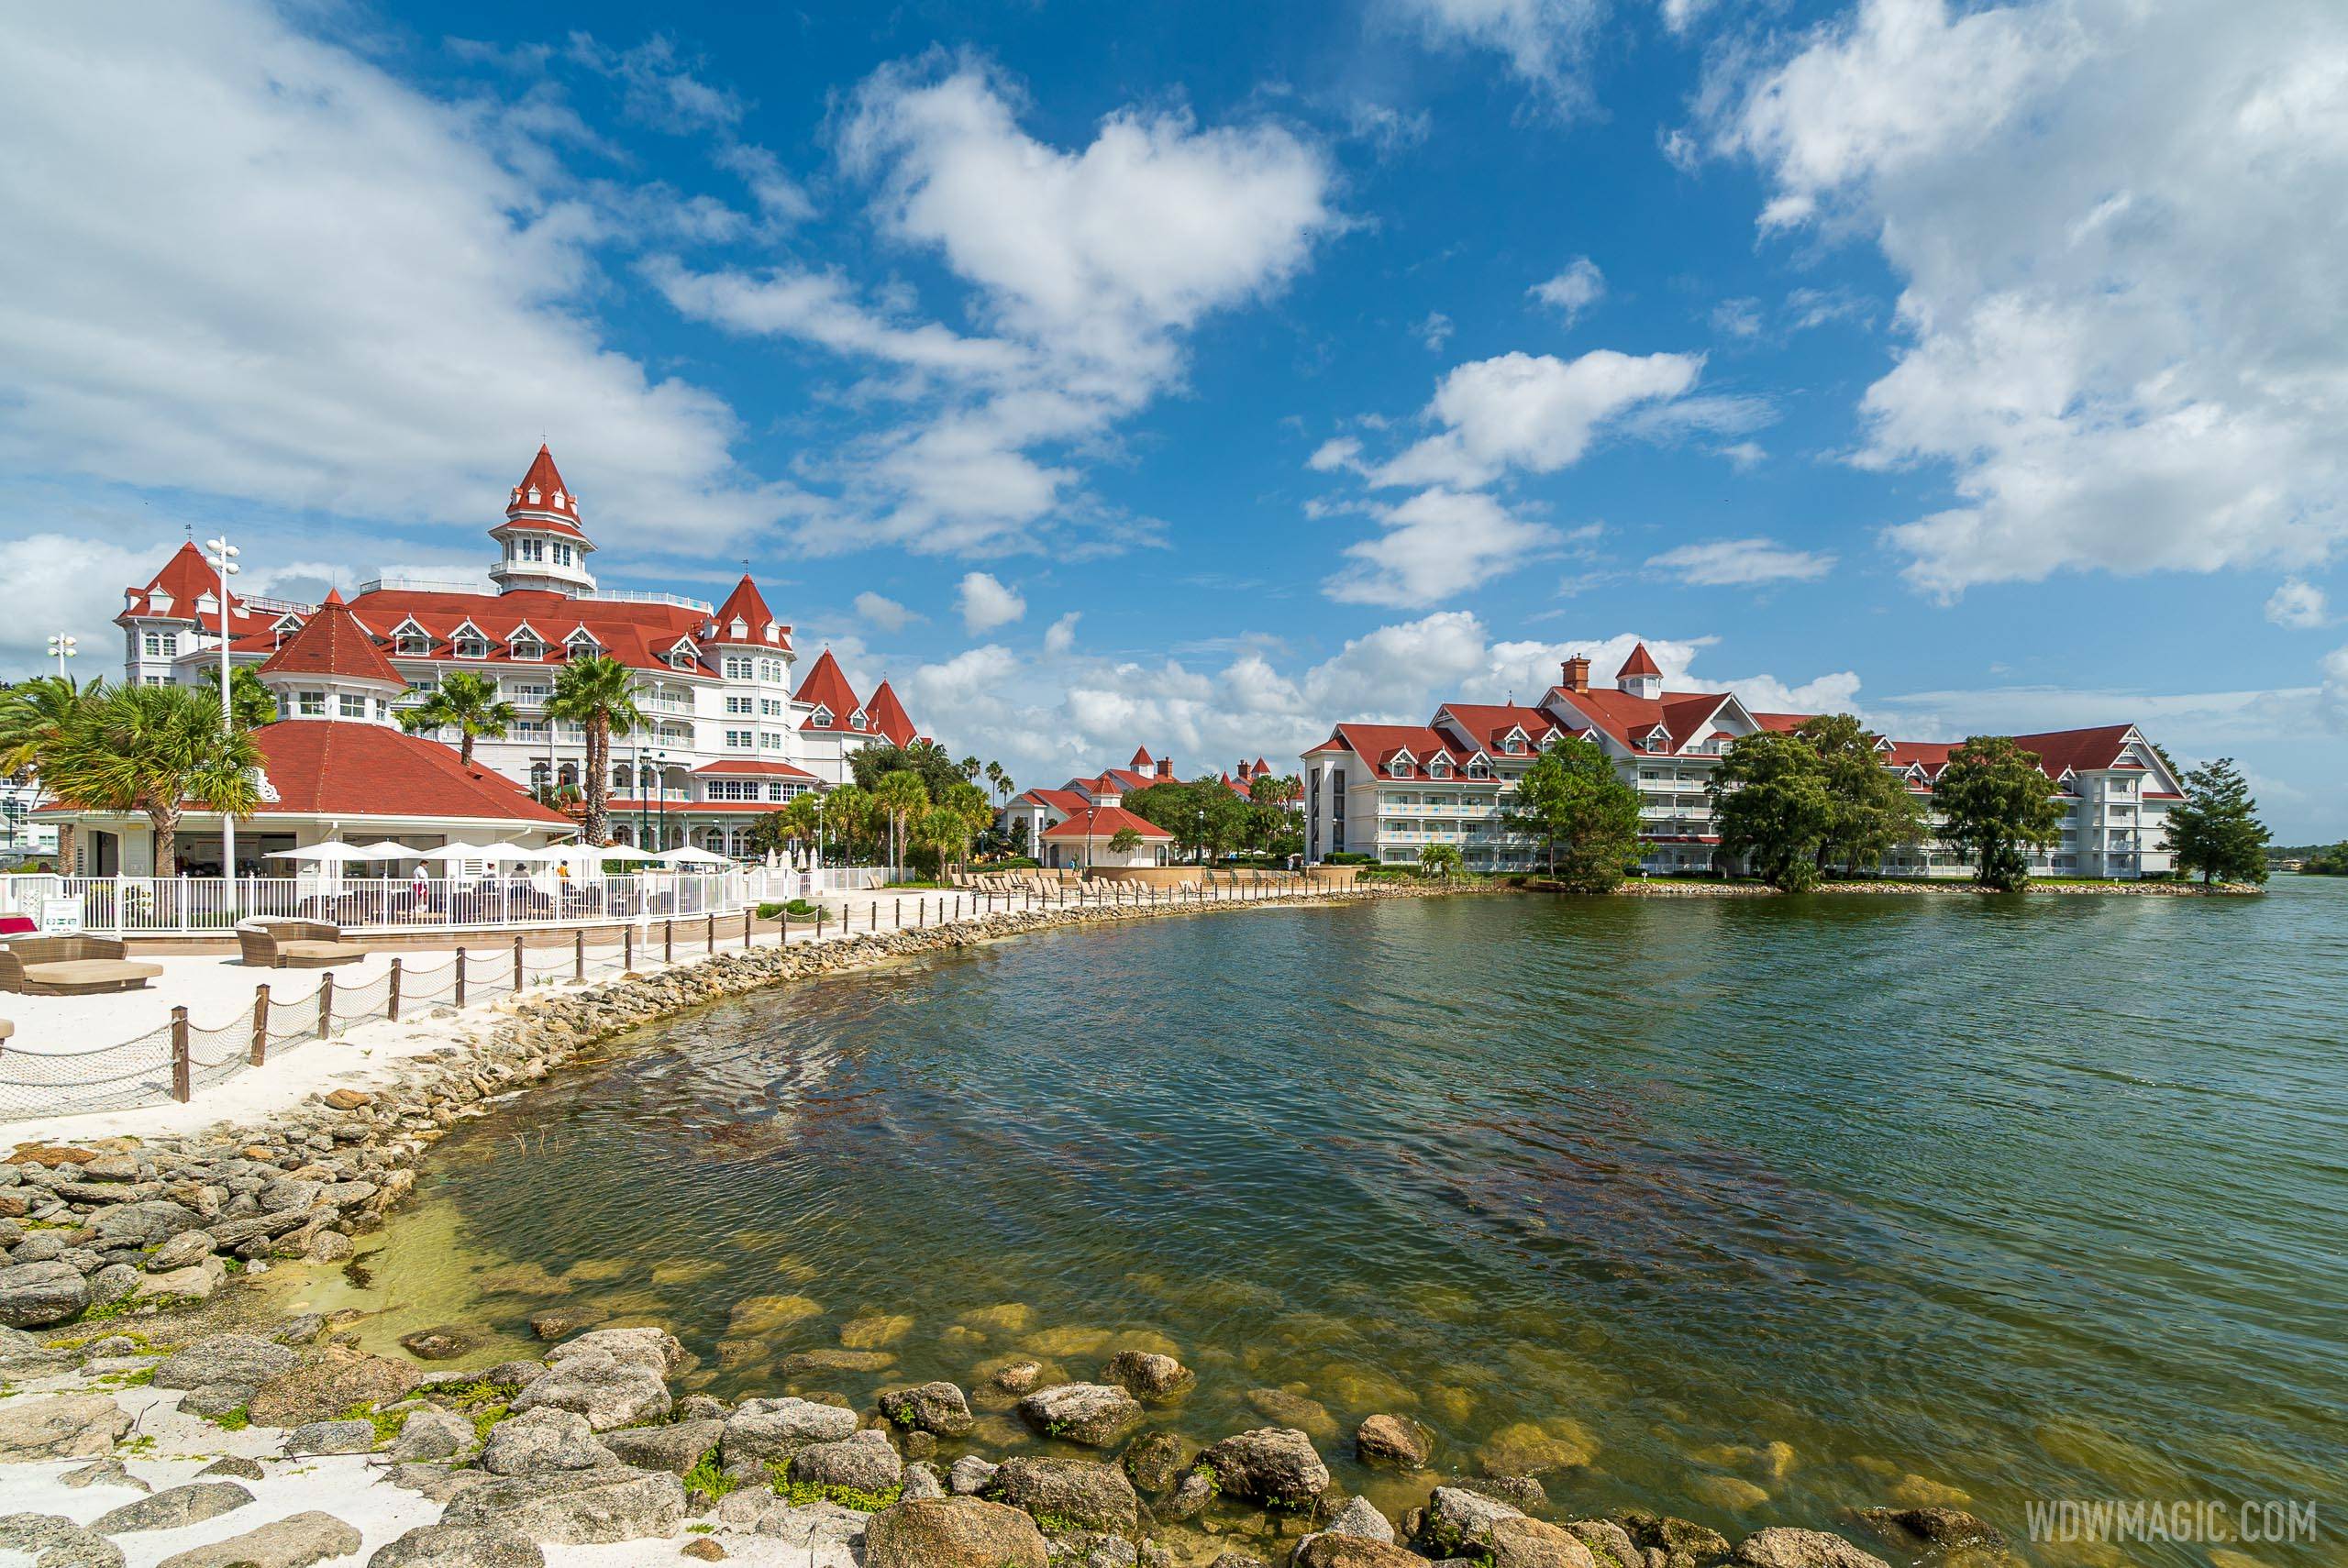 Some Grand Floridian Resort restaurants closed this week